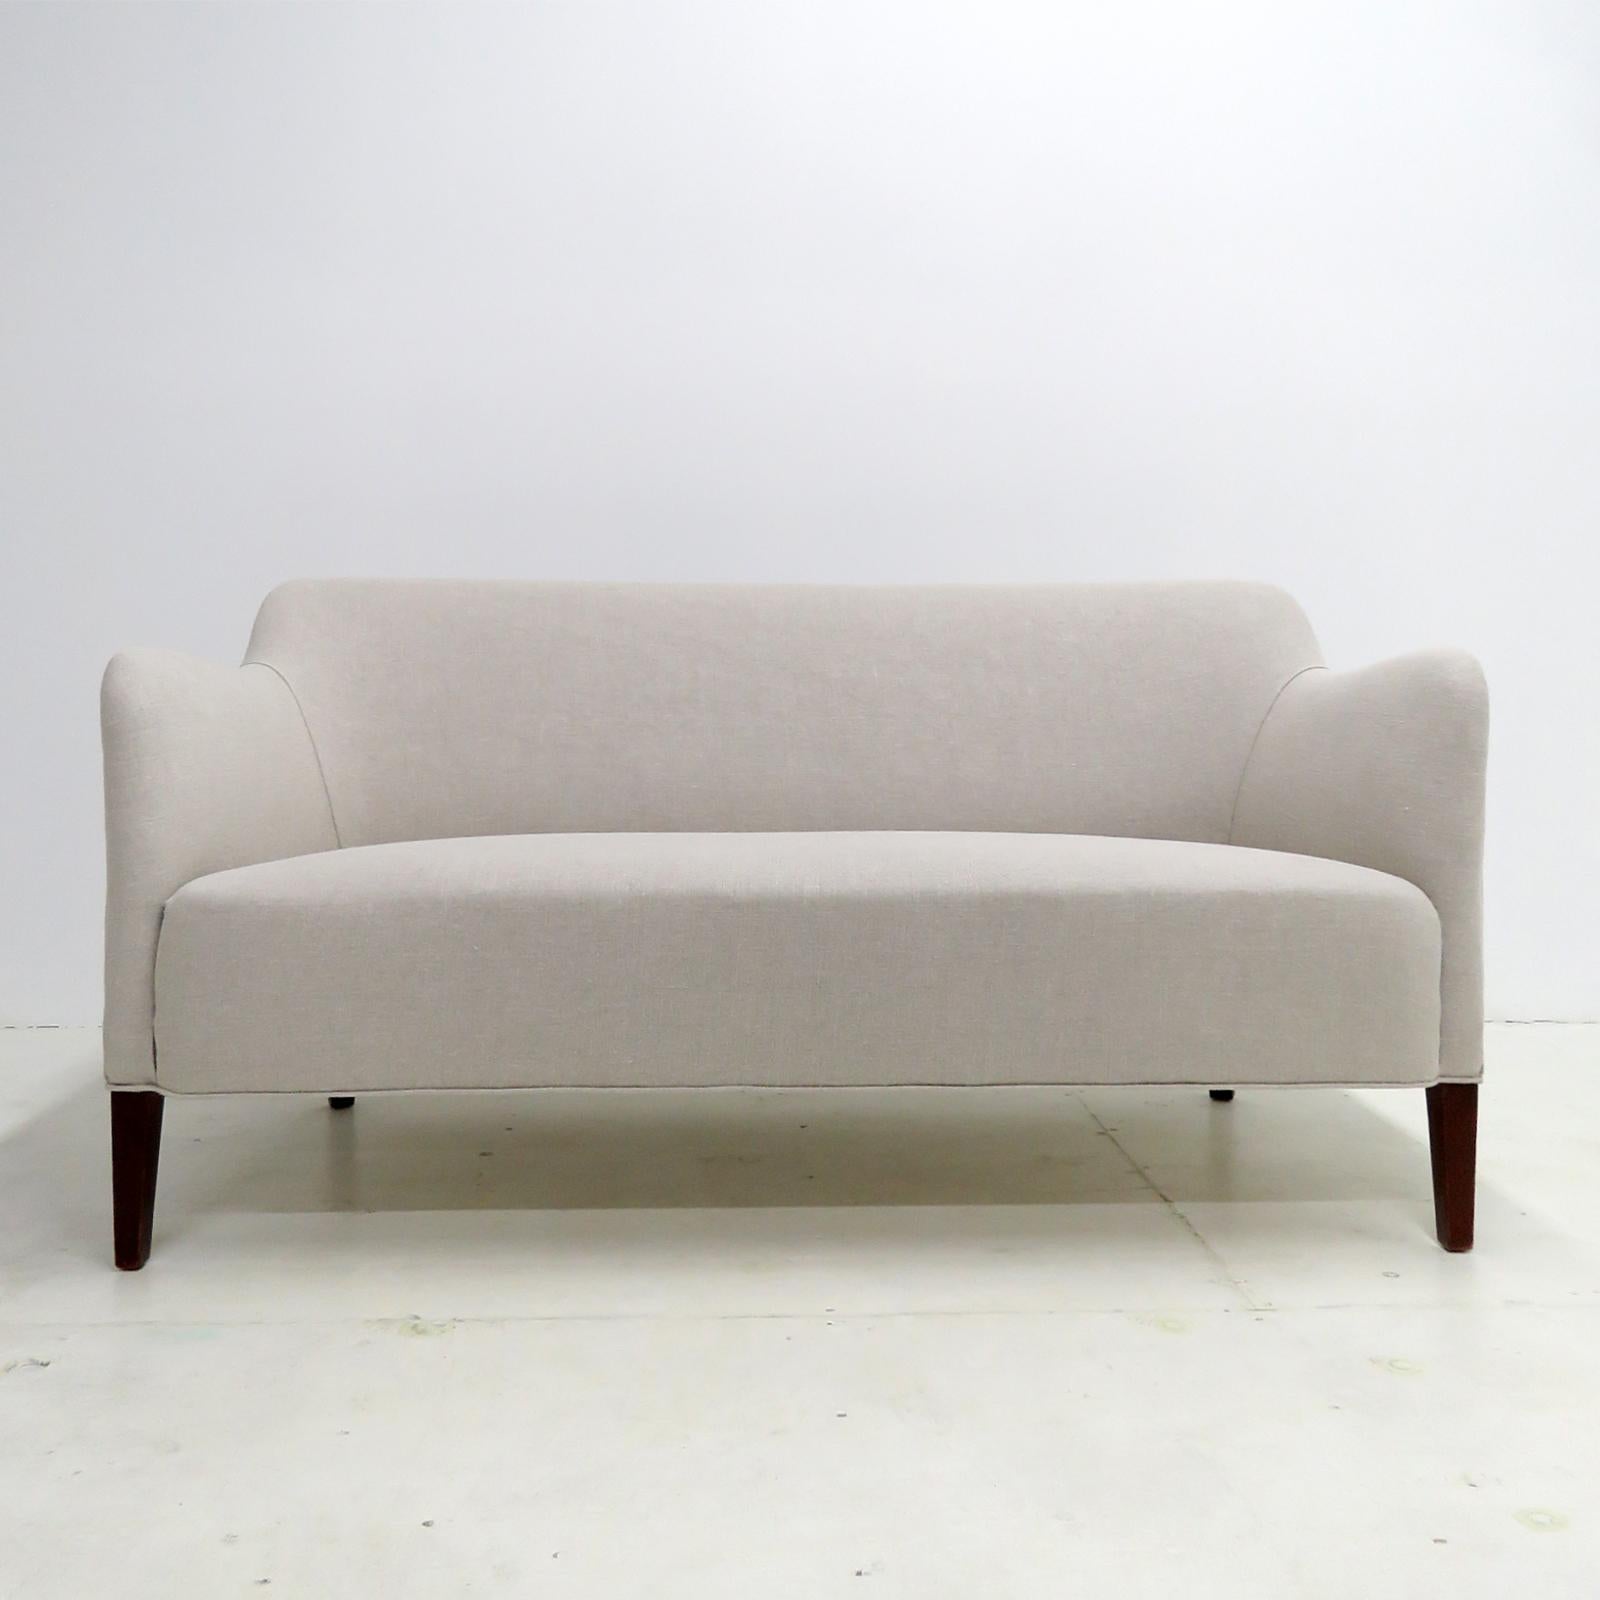 Wonderful Danish modern settee designed by Jacob Kjaer, 1940s, dark stained beech legs with a newly upholstered linen fabric.